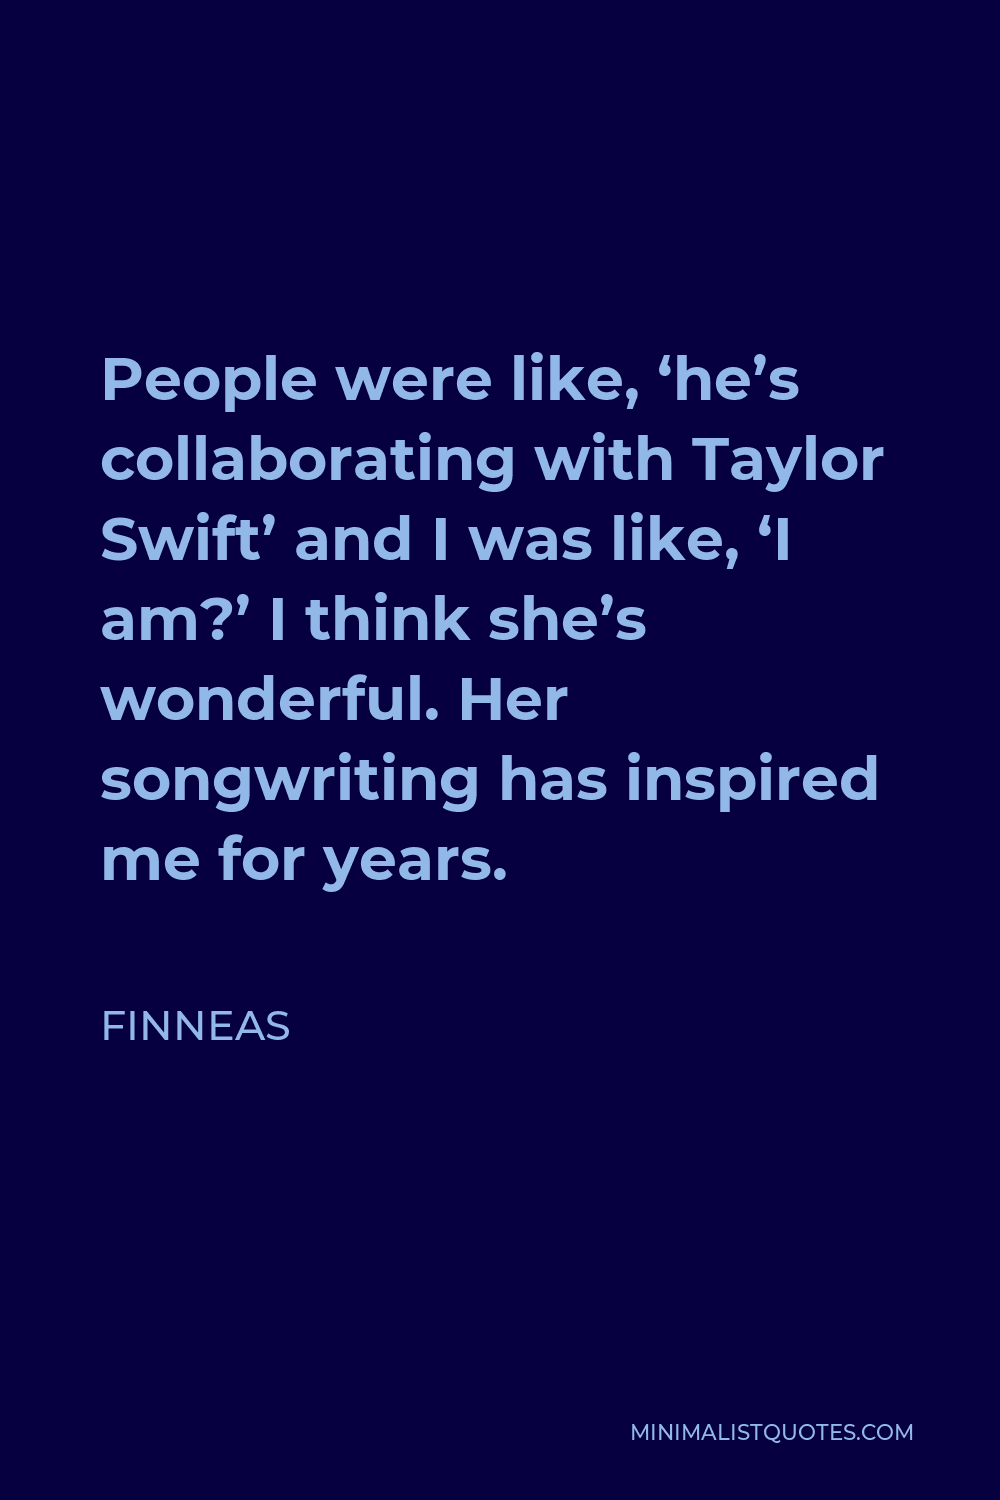 Finneas Quote - People were like, ‘he’s collaborating with Taylor Swift’ and I was like, ‘I am?’ I think she’s wonderful. Her songwriting has inspired me for years.